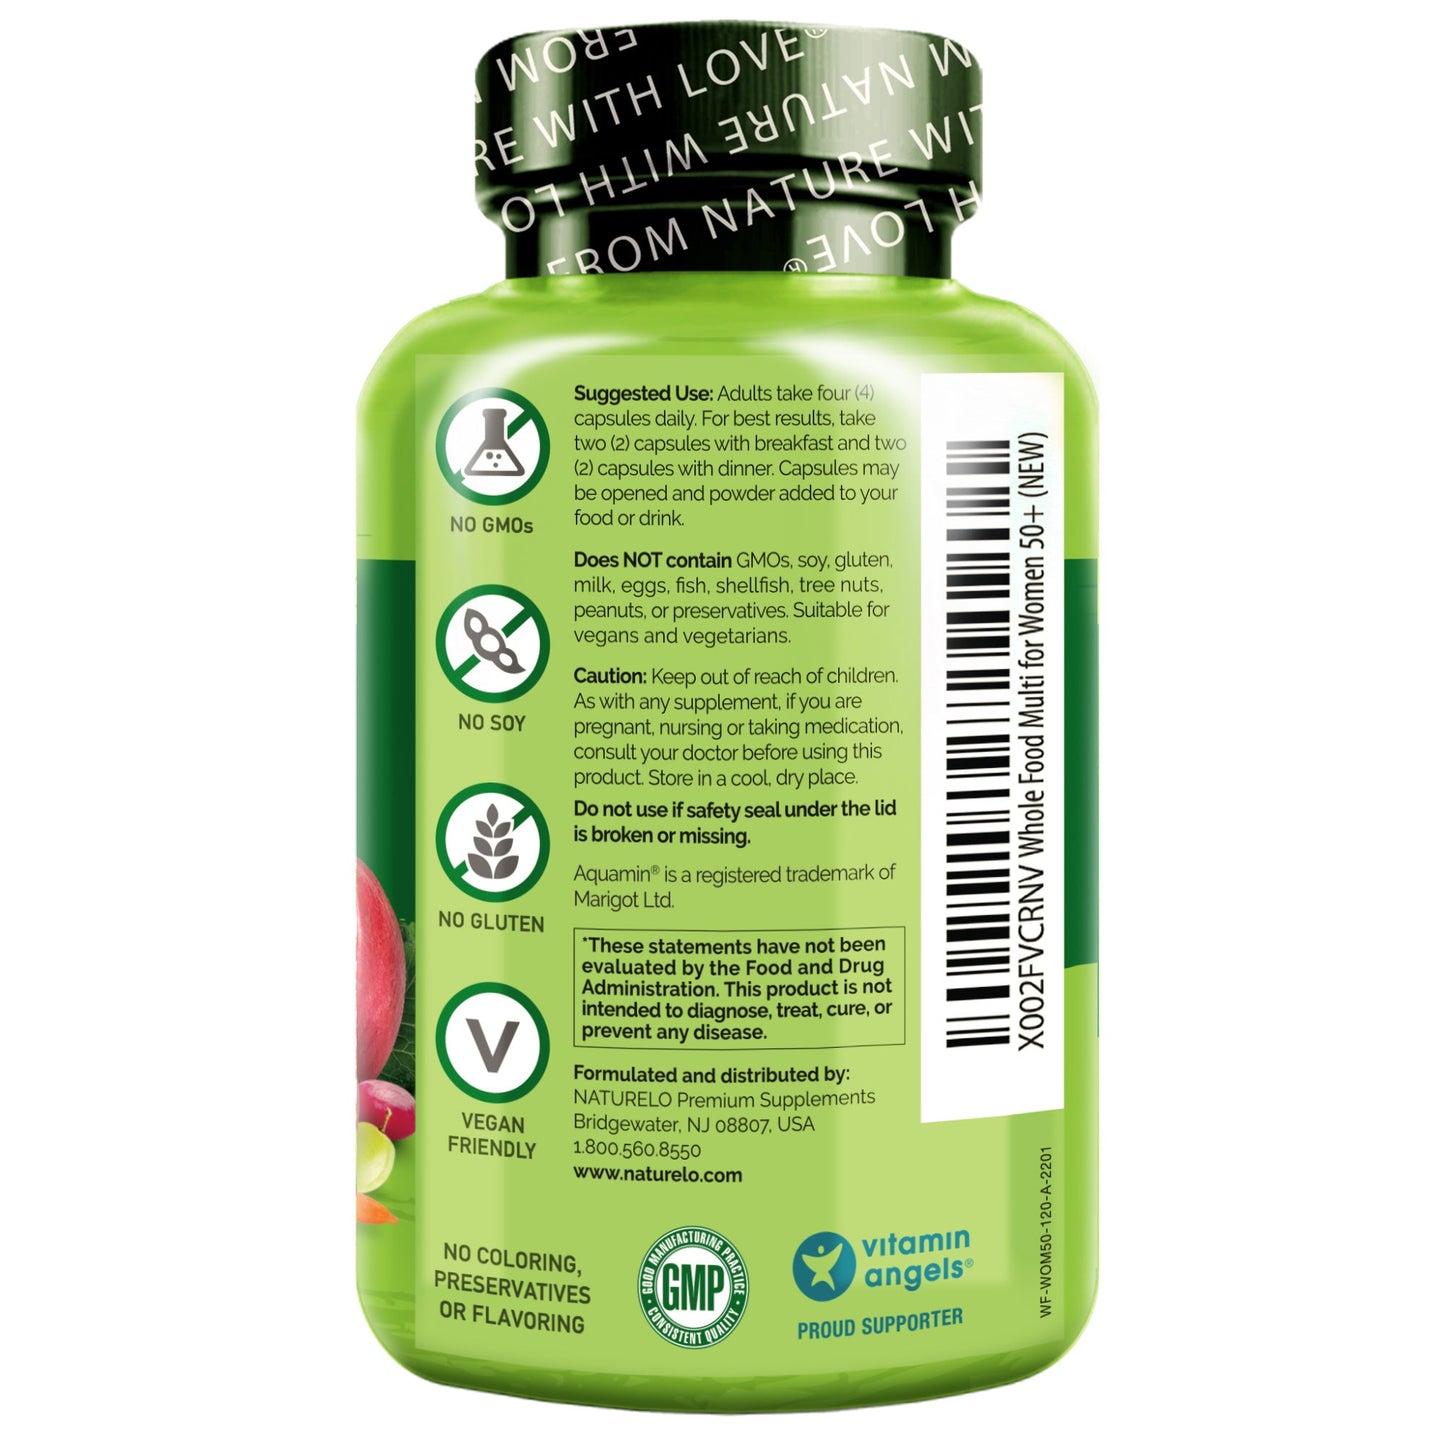 Whole Food Multivitamin for Women 50+